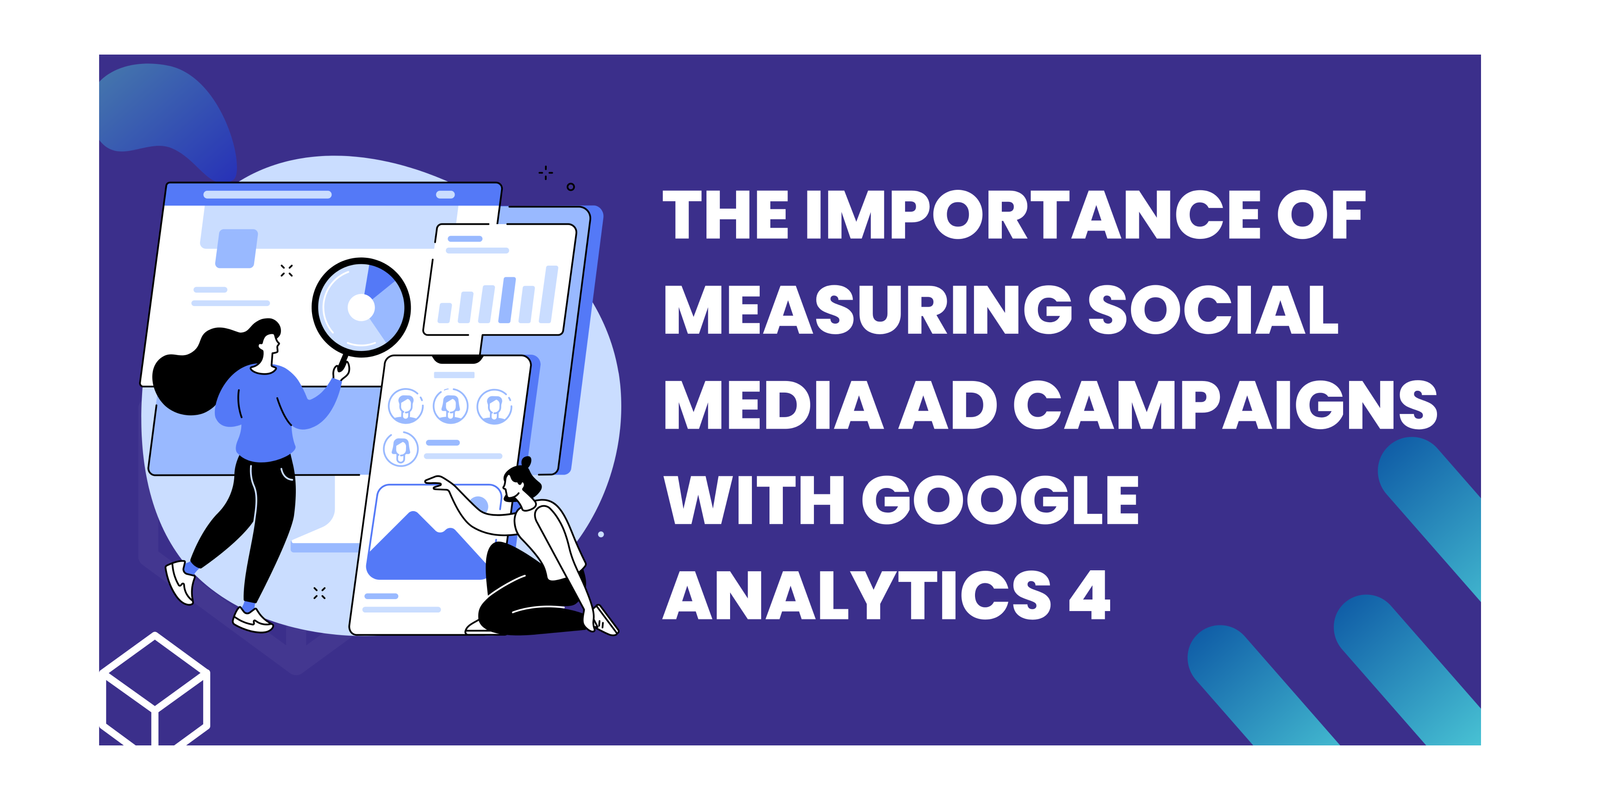 The Importance of Measuring Social Media Ad Campaigns with Google Analytics 4